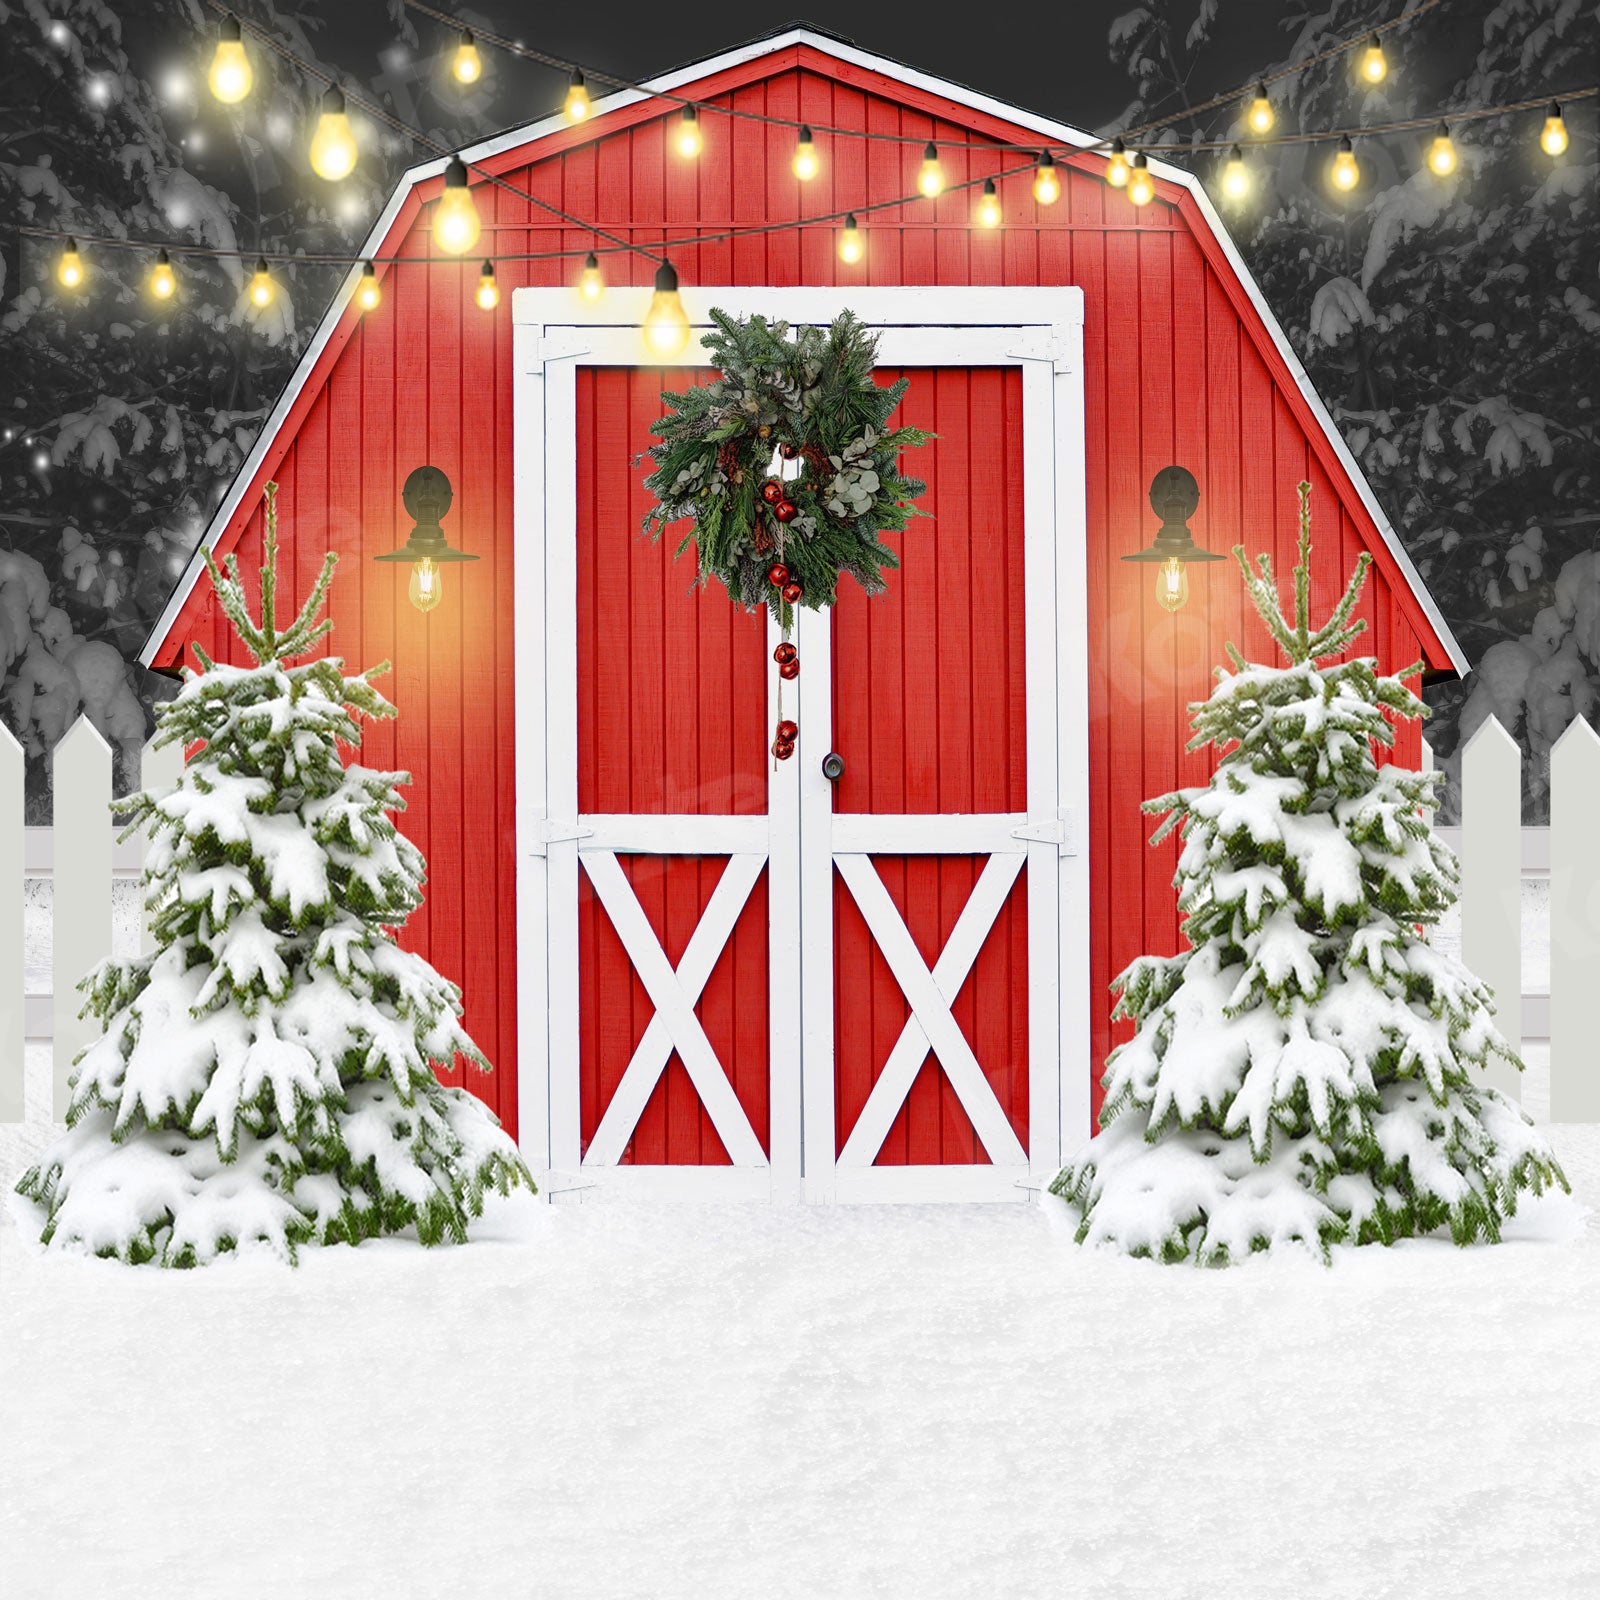 Kate Christmas Backdrop Outdoor Snow Red Barn Door Designed by Uta Mueller Photography